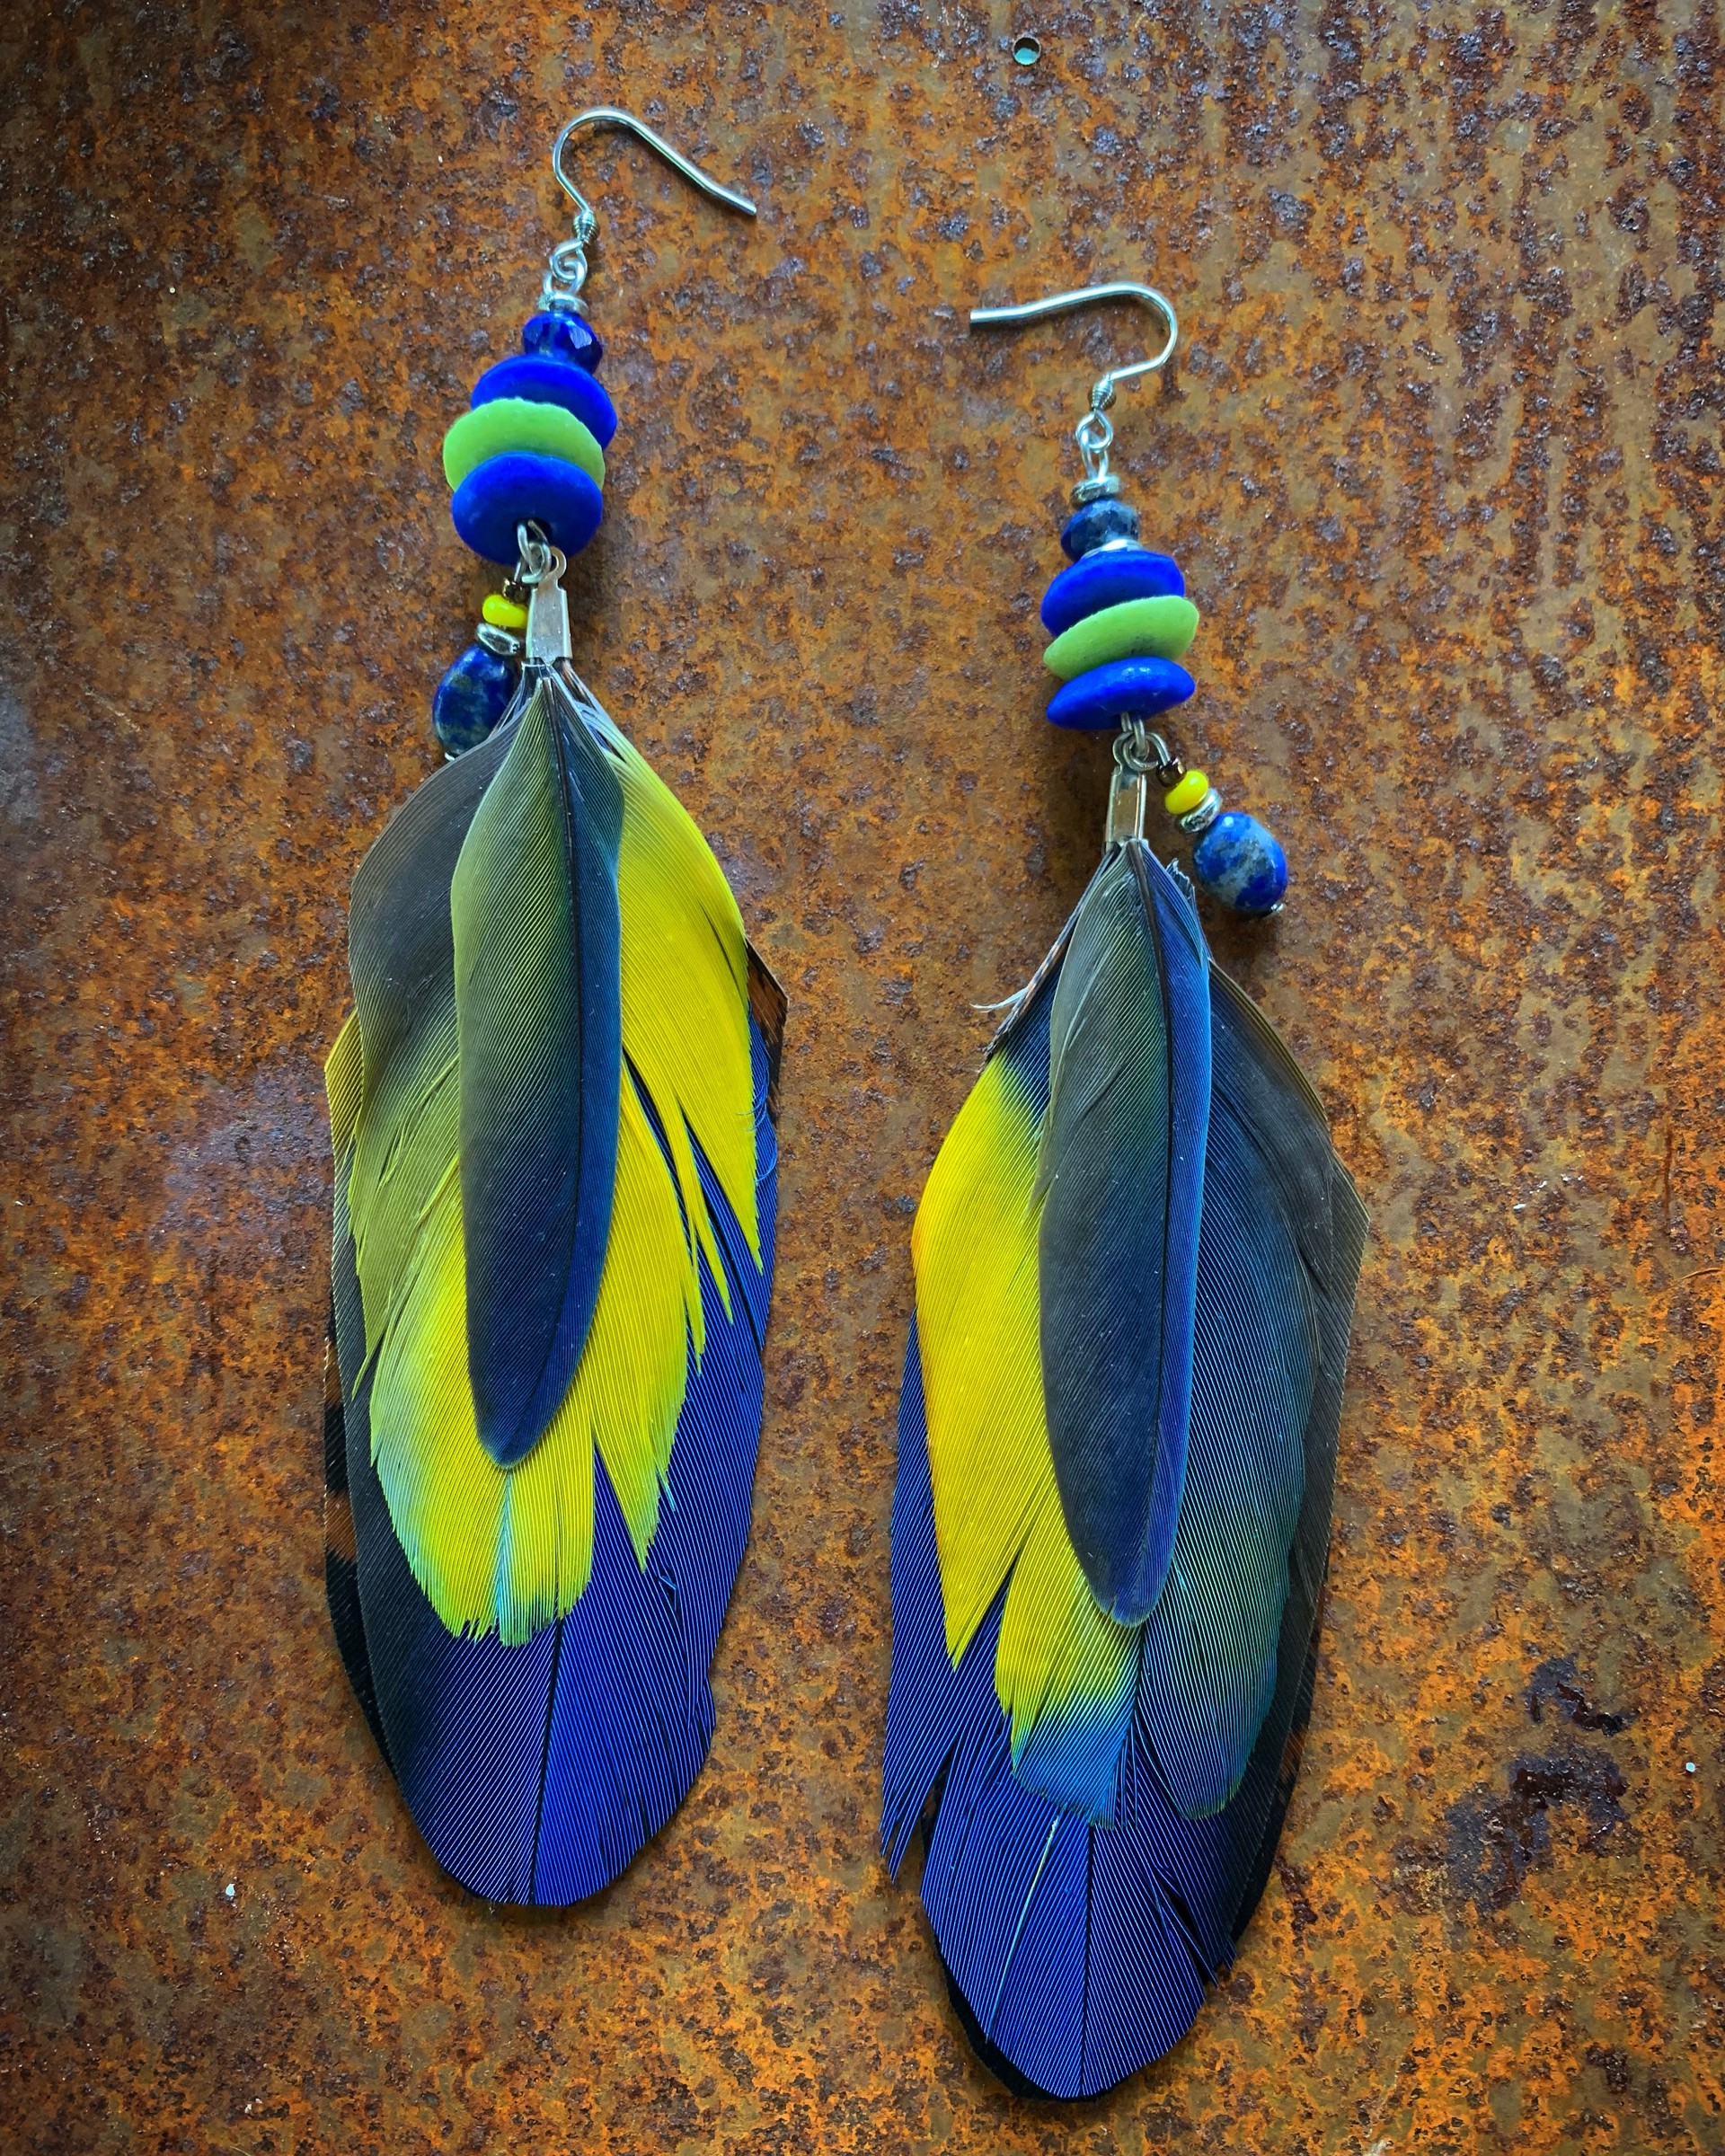 K669 Ethically Sourced Parrot Earrings Blue and Yellow by Kelly Ormsby